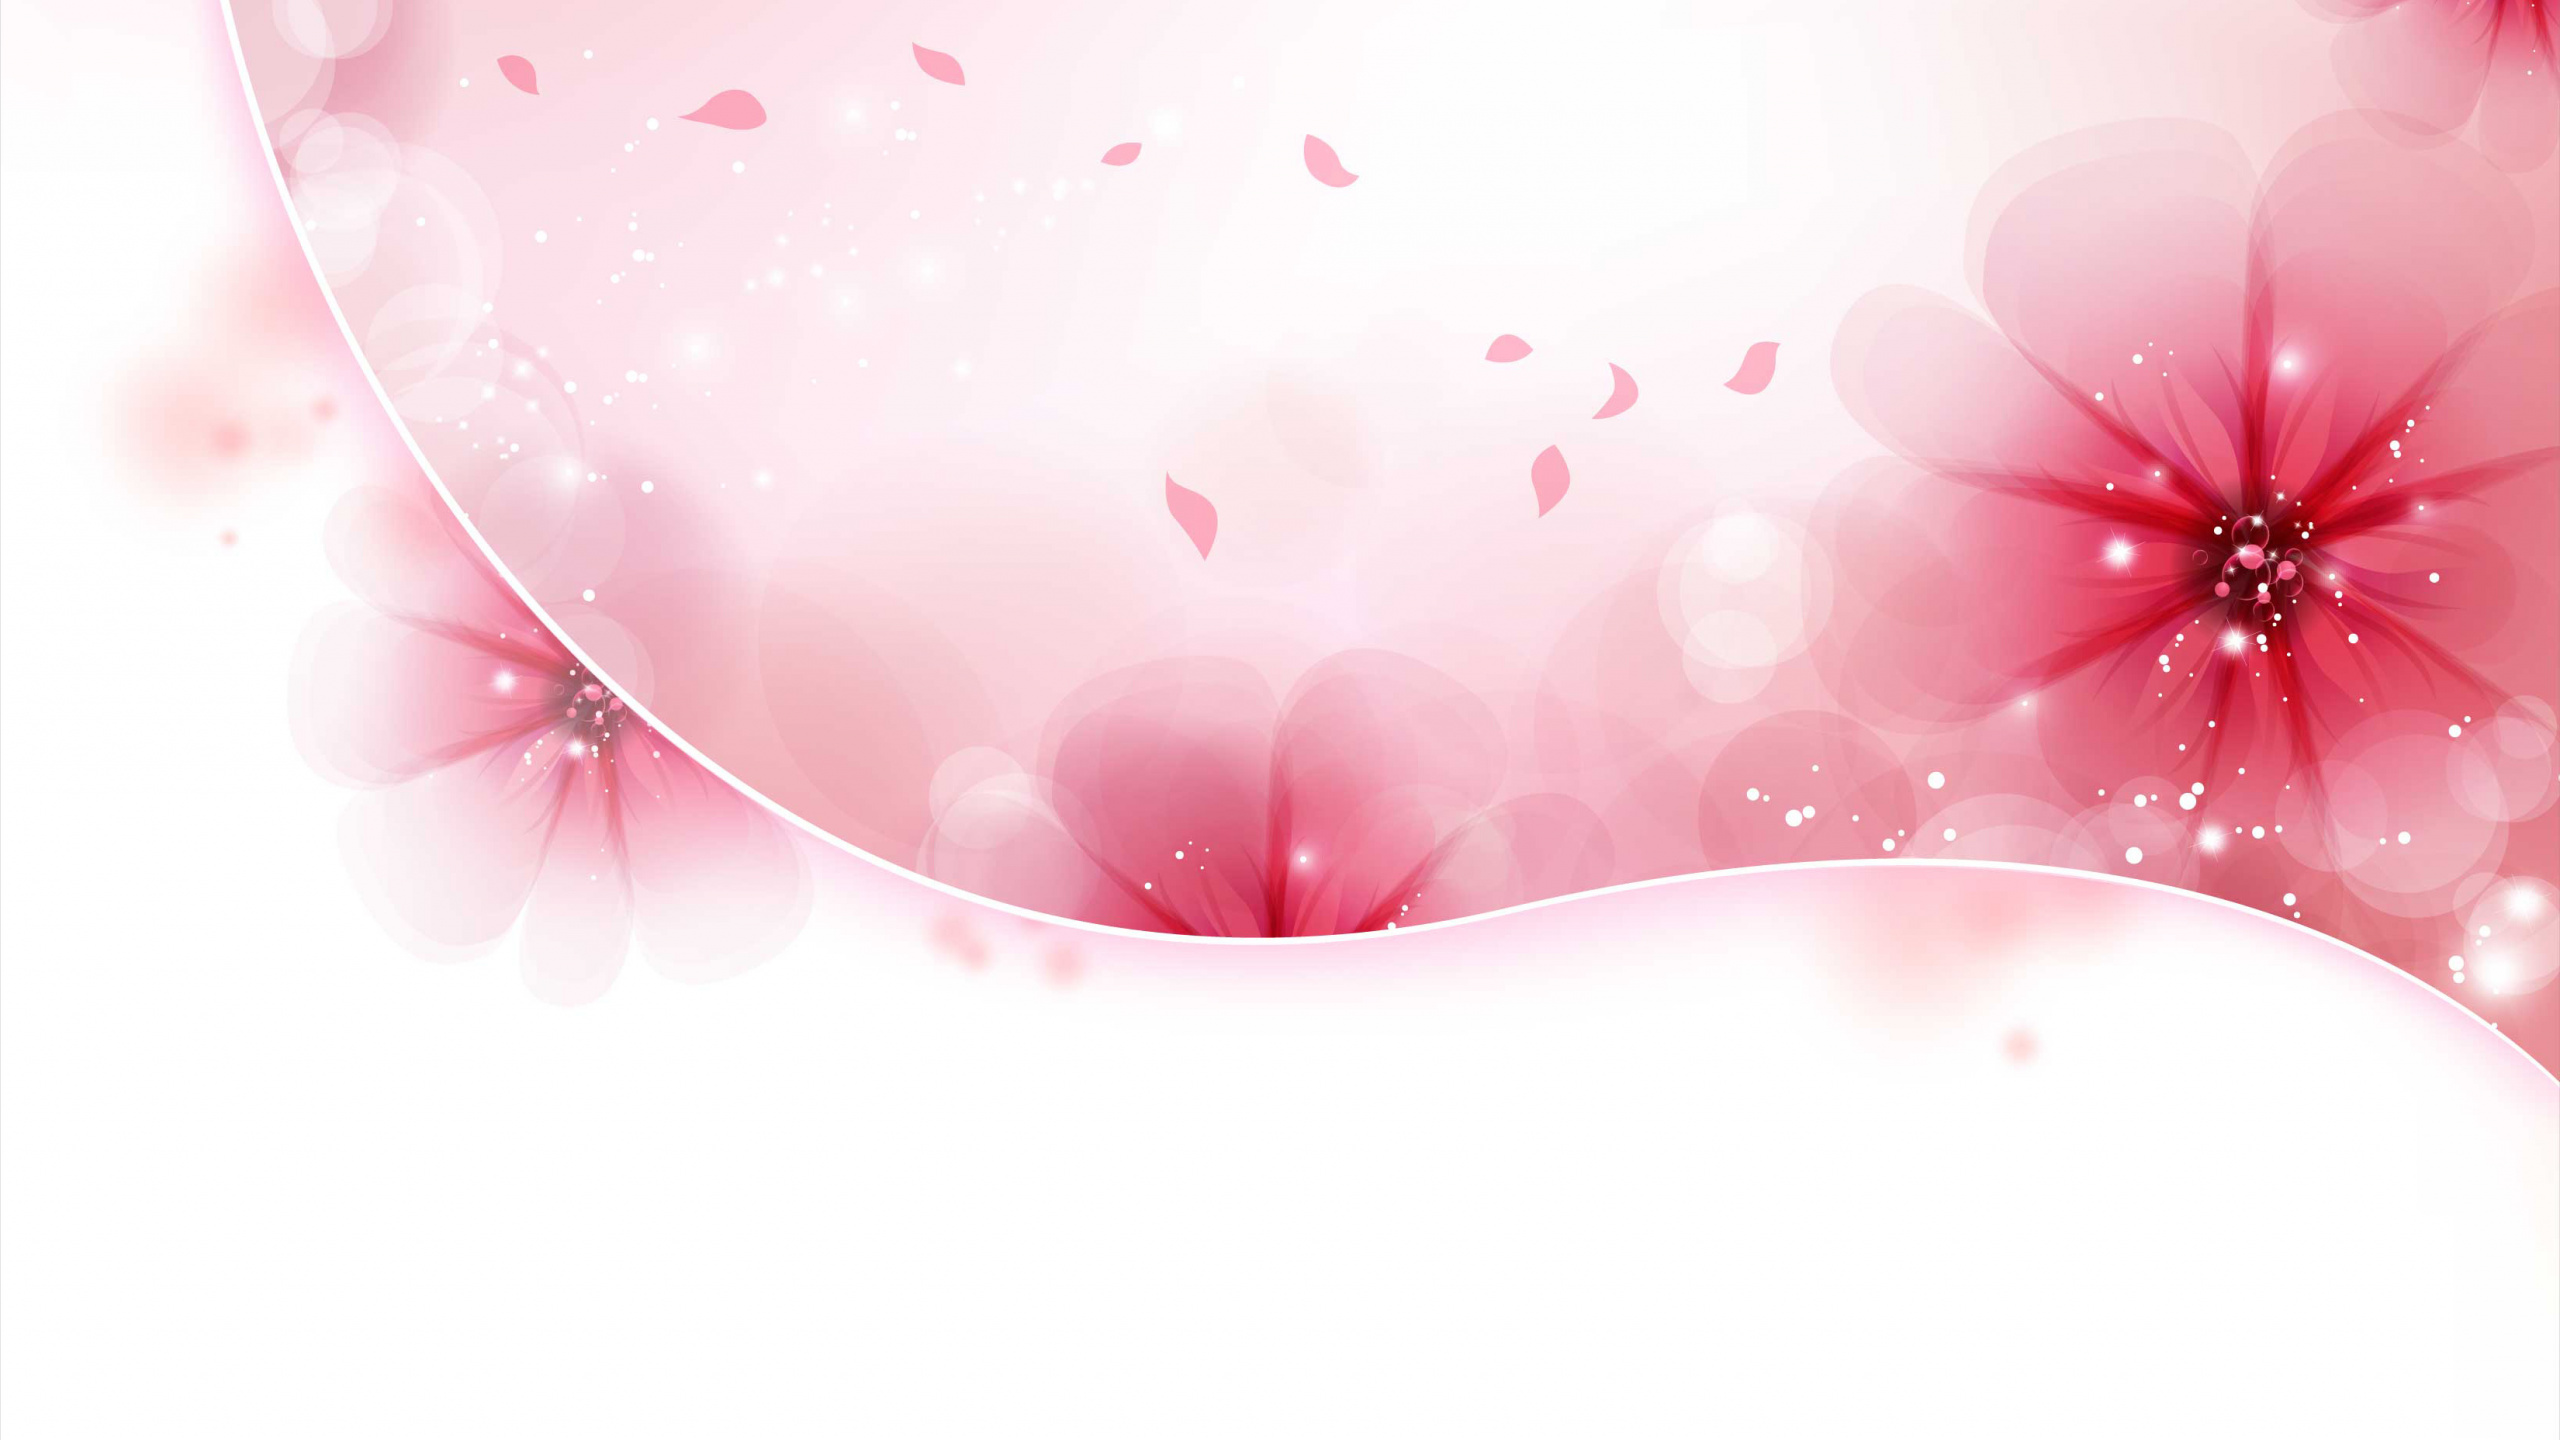 Red and White Heart Illustration. Wallpaper in 2560x1440 Resolution